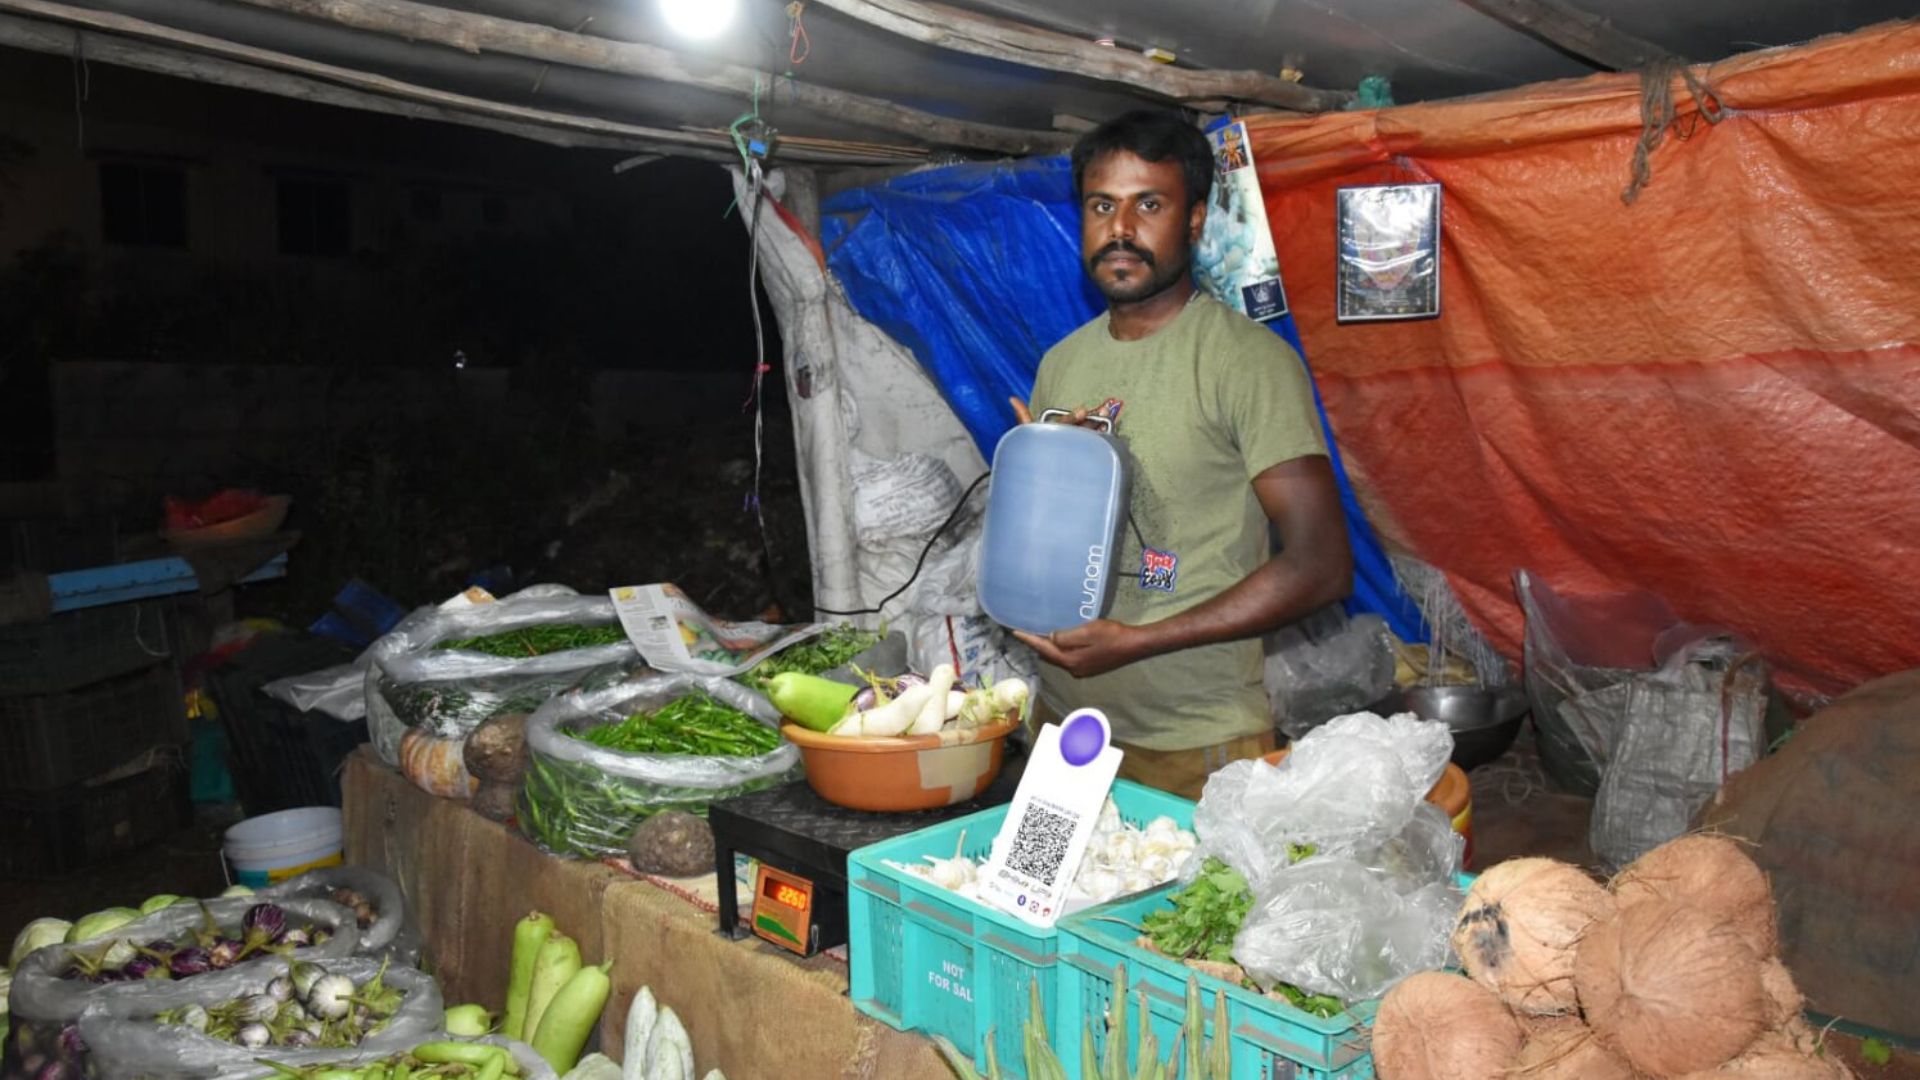 Street vendors in India using the 2nd life energy storage systems at night.